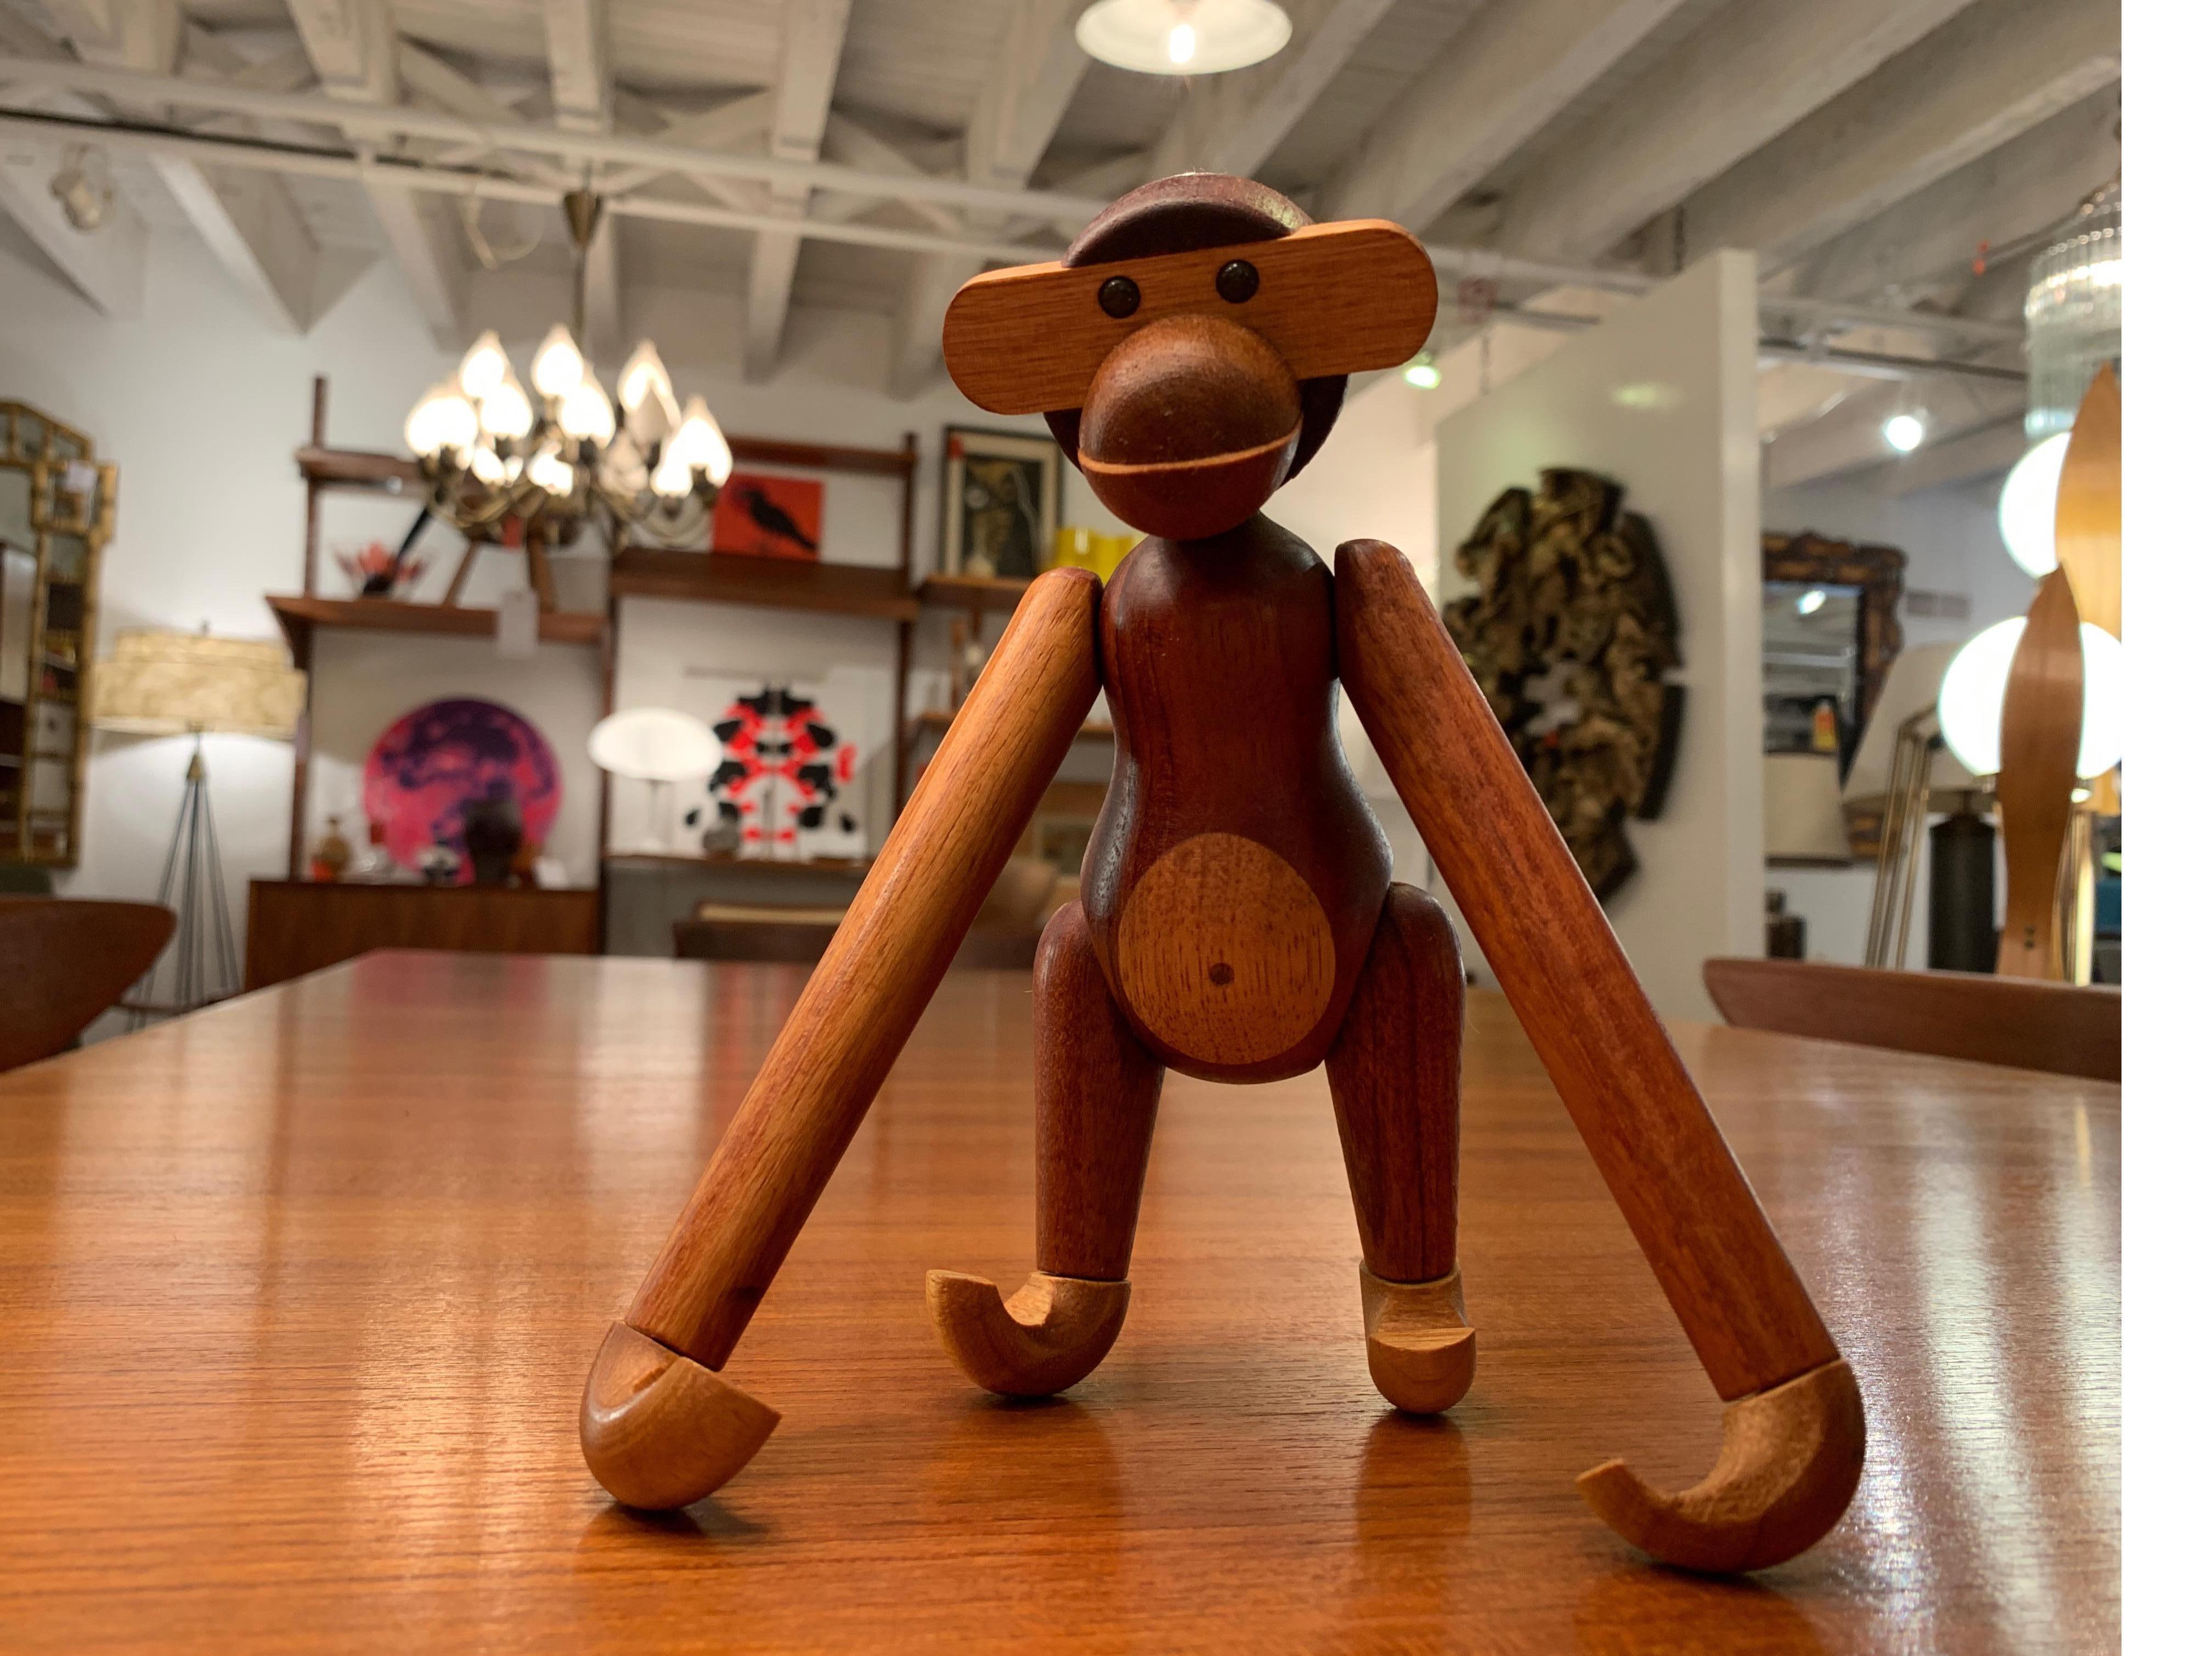 Charming and beautiful articulated monkey in teak and limba wood by Kay Bojesen, Denmark, 1960s. A wonderful accessory sure to accentuate your decor.